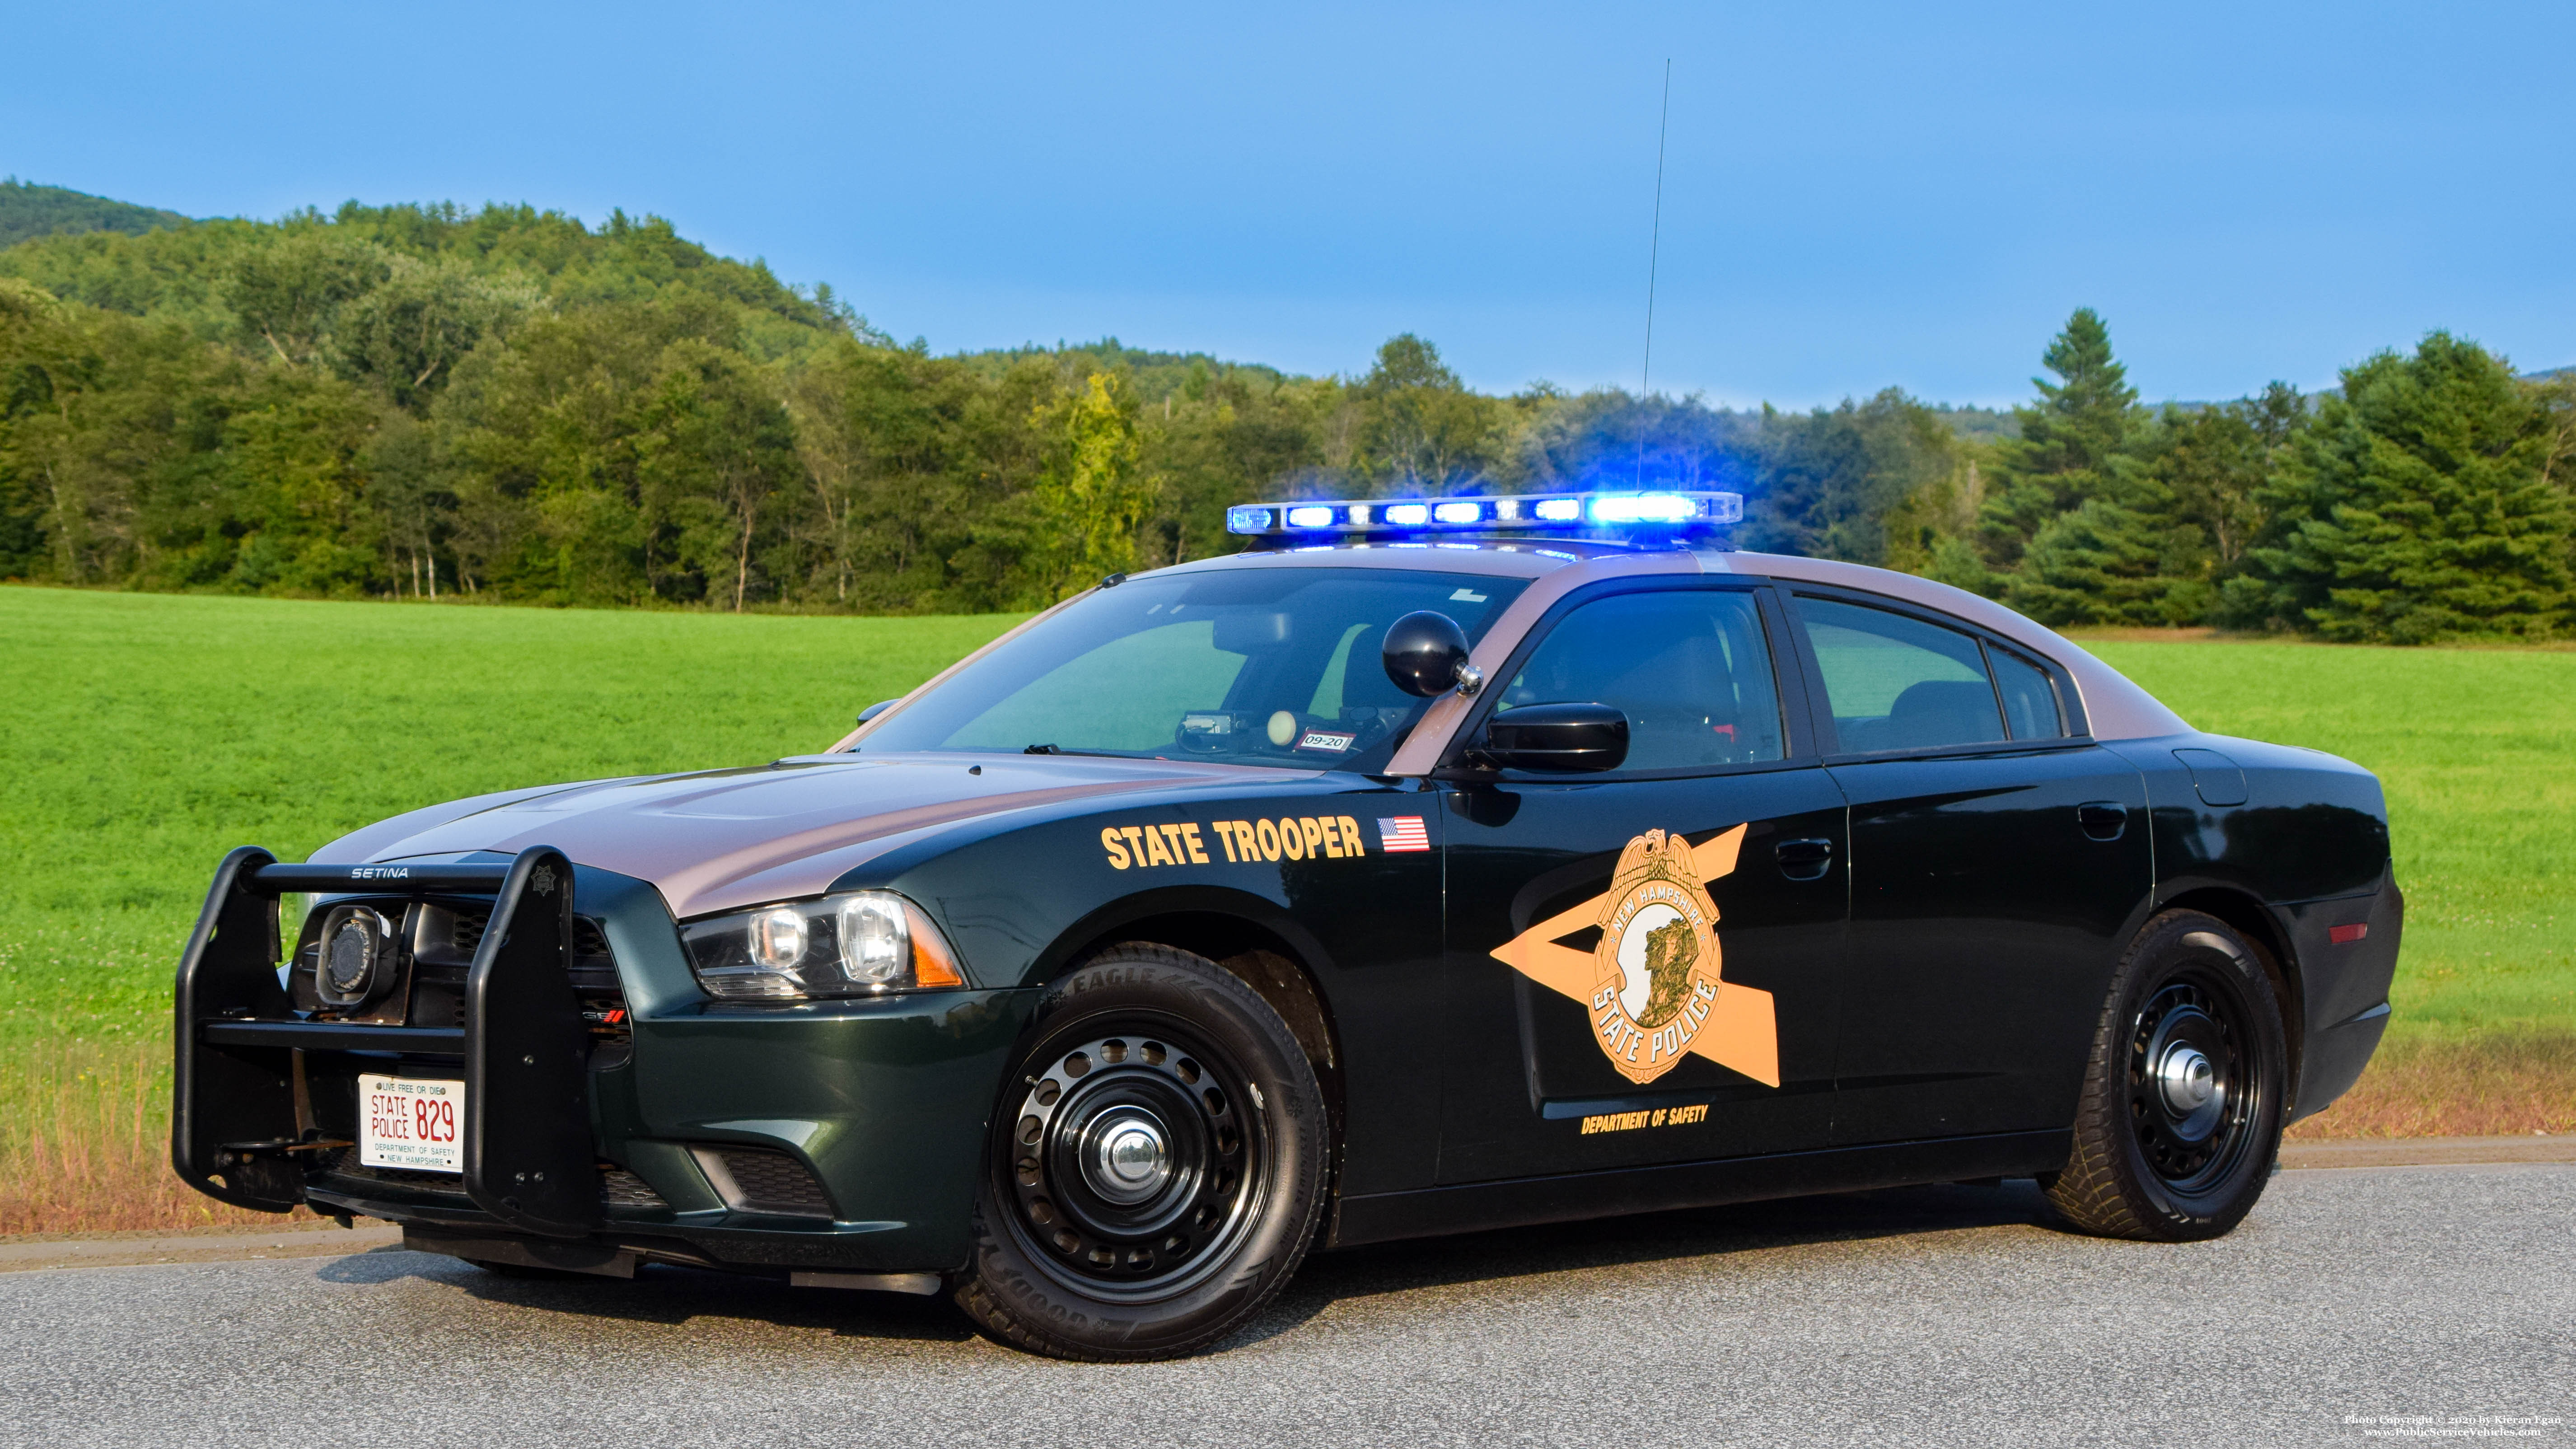 A photo  of New Hampshire State Police
            Cruiser 829, a 2014 Dodge Charger             taken by Kieran Egan